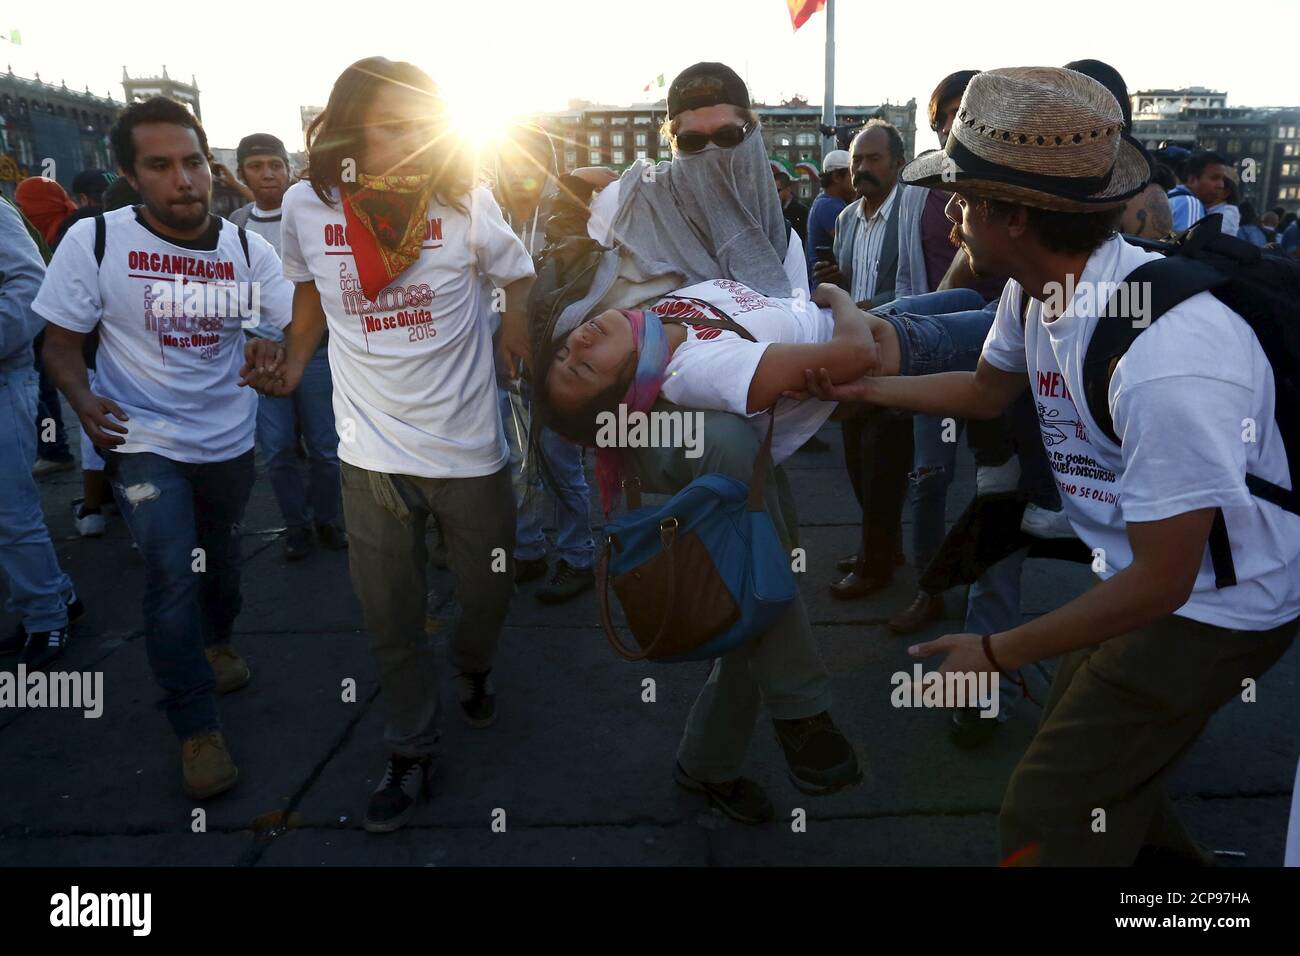 A protester, who fainted, is carried during clashes with riot police at a march marking the 47th anniversary of the 1968 Tlatelolco square massacre at Zocalo square in Mexico City, October 2, 2015. Thousands took part in the march to mark the 47th anniversary of the student massacre at which dozens, maybe hundreds, of protesters were gunned down by the army in a brutal repression of the student movement. REUTERS/Edgard Garrido Stock Photo